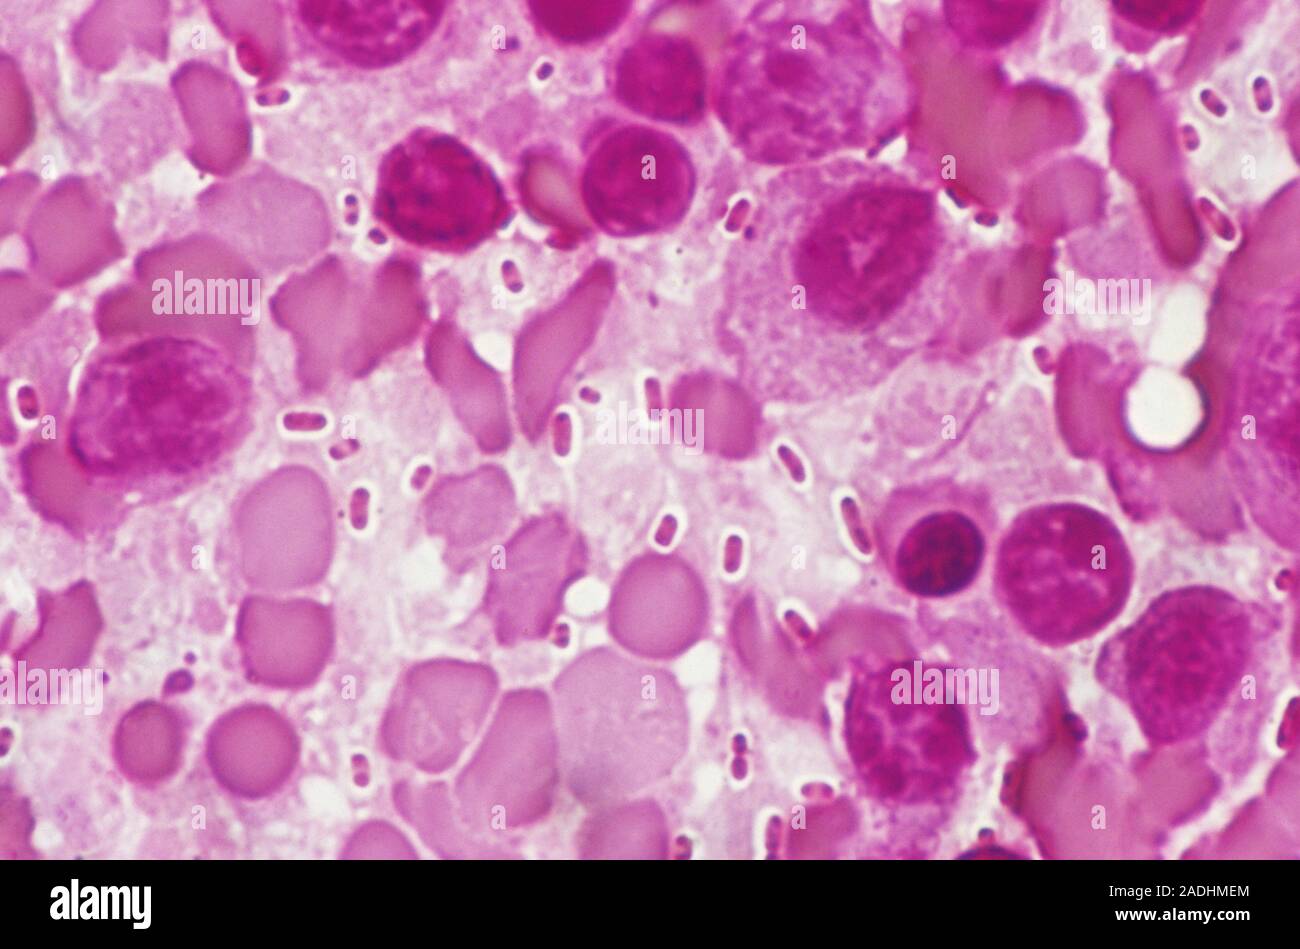 Bacterial pneumonia infection. Light micrograph of pneumonia bacteria (Klebsiella pneumoniae, rod- shaped, pink) among cells in a sample of pus from a Stock Photo